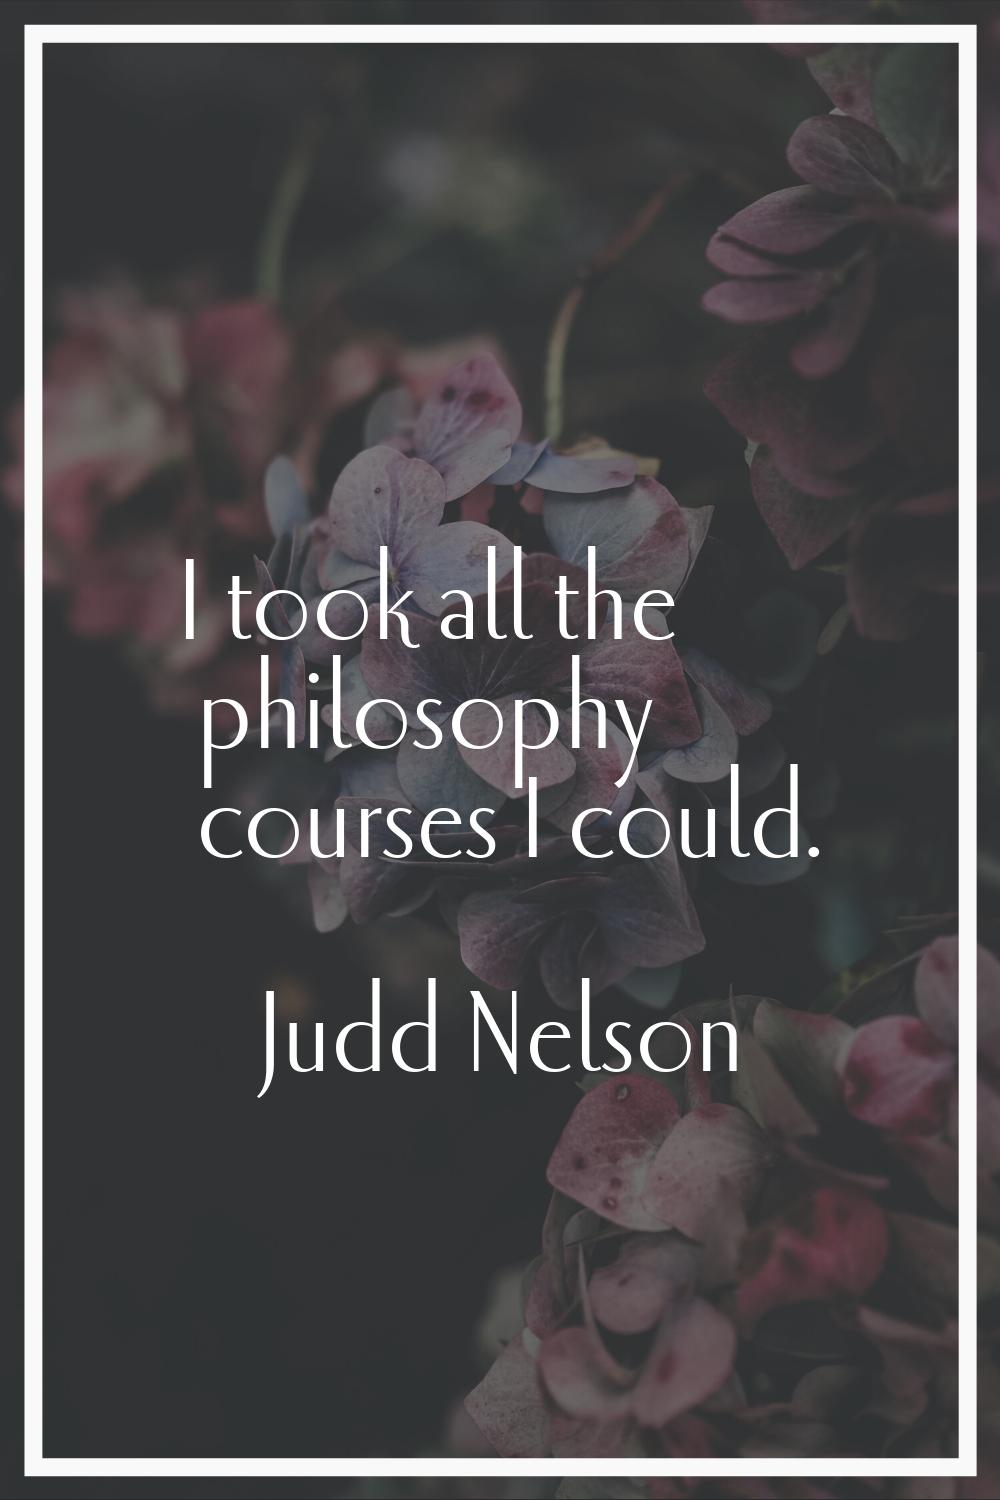 I took all the philosophy courses I could.